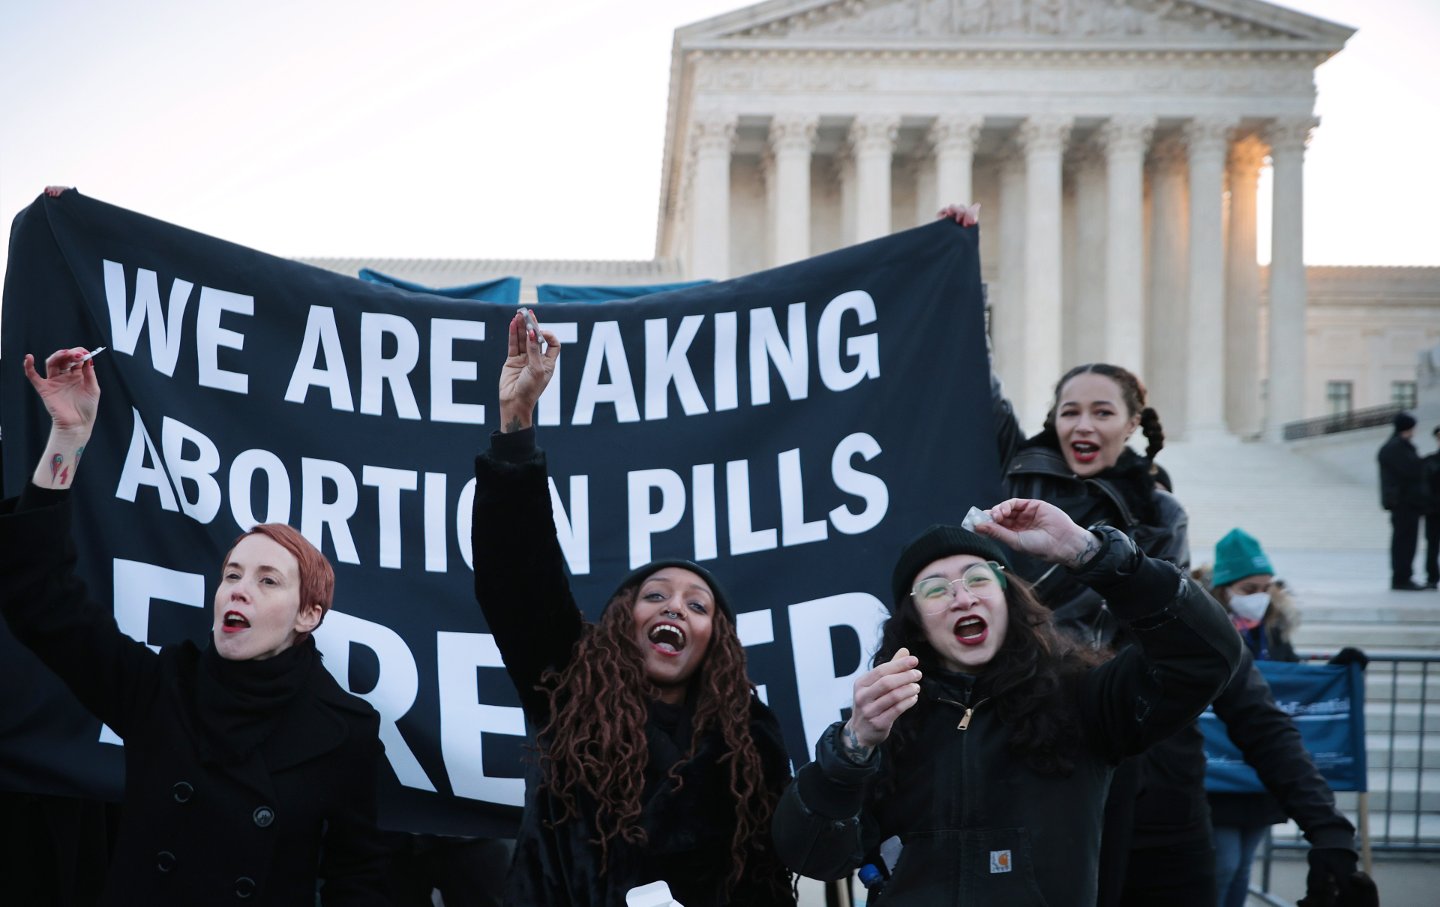 Protesters hold a huge banner reading "We Are Taking Abortion Pills Forever" in front of the Supreme Court.